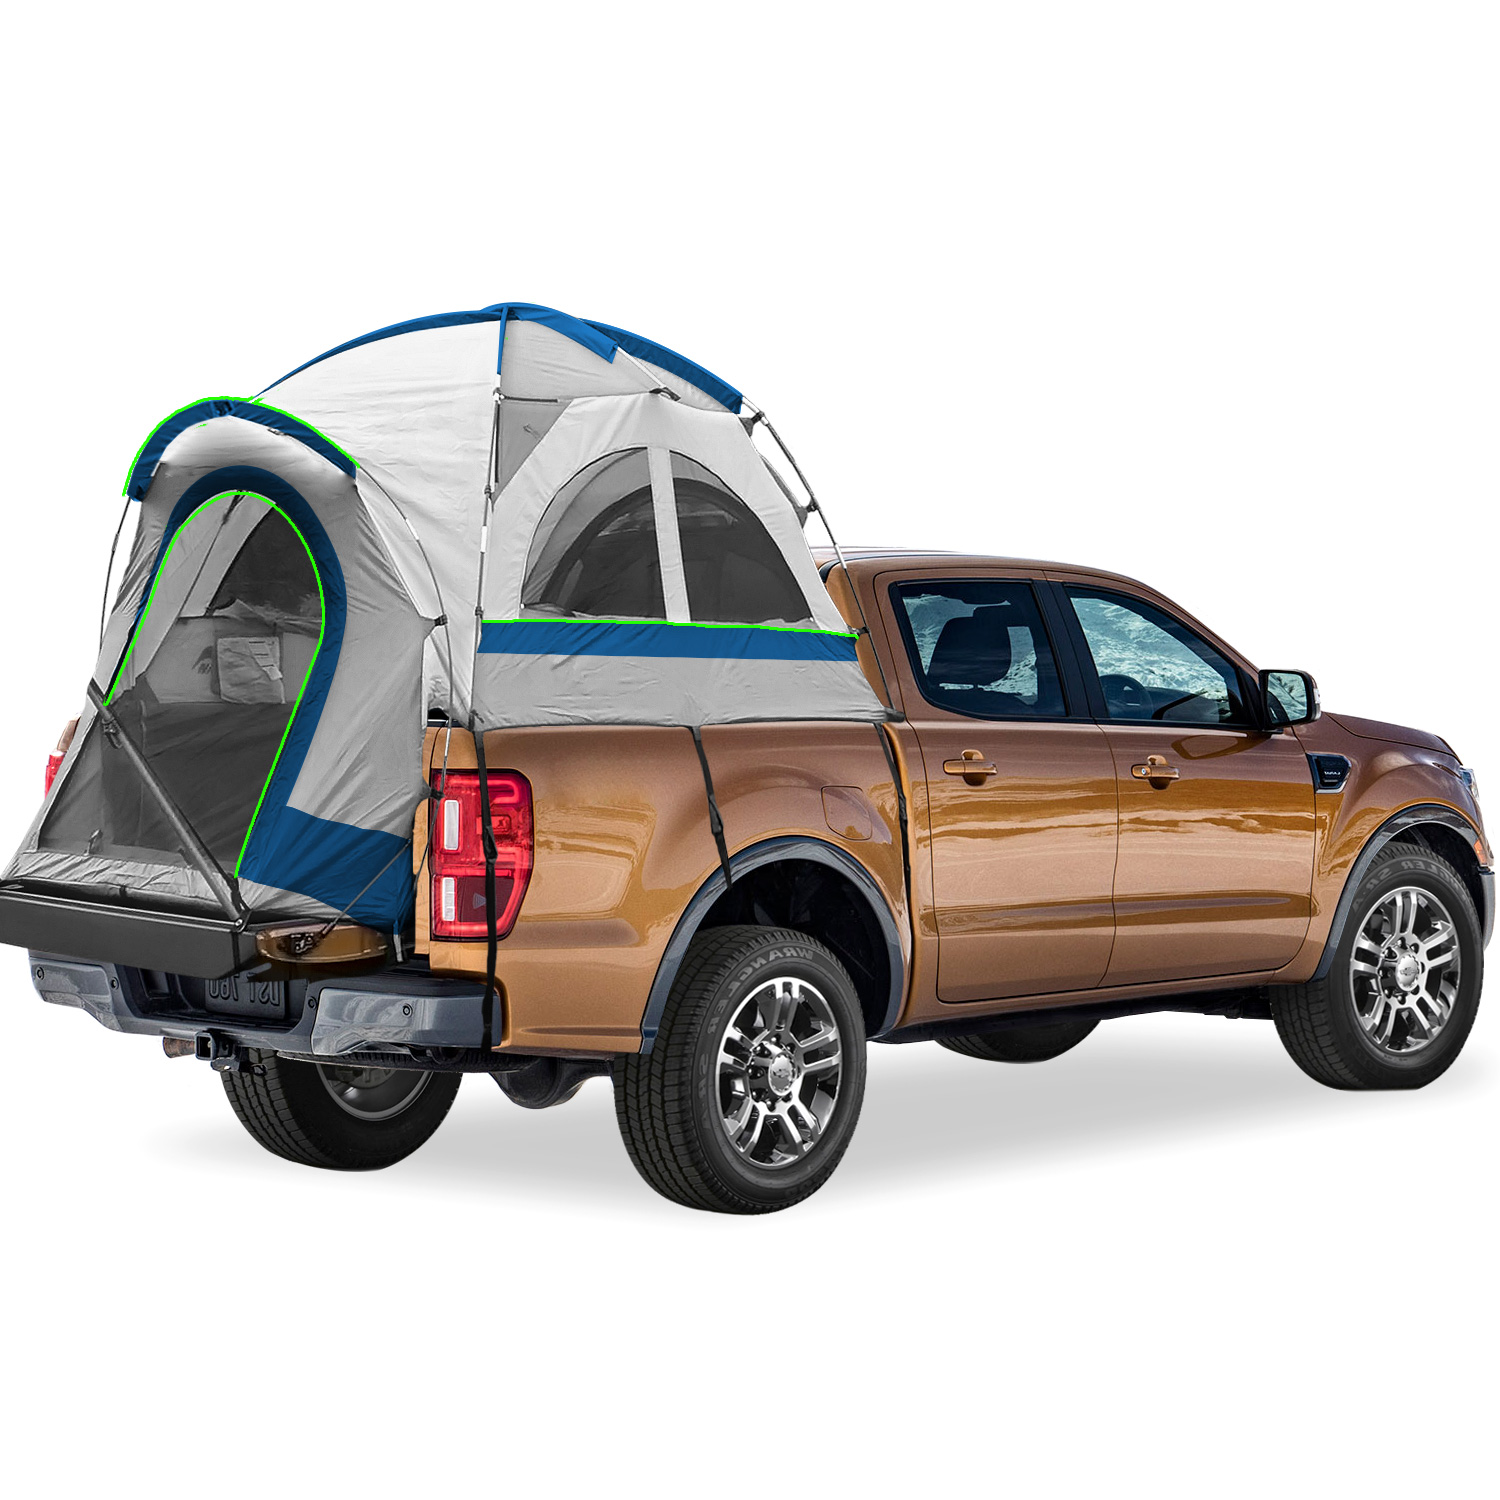 North East Harbor Pickup Truck Bed Camping Tent, 2-Person Sleeping Capacity, Includes Rainfly and Storage Bag - Fits Full Size Truck with Short